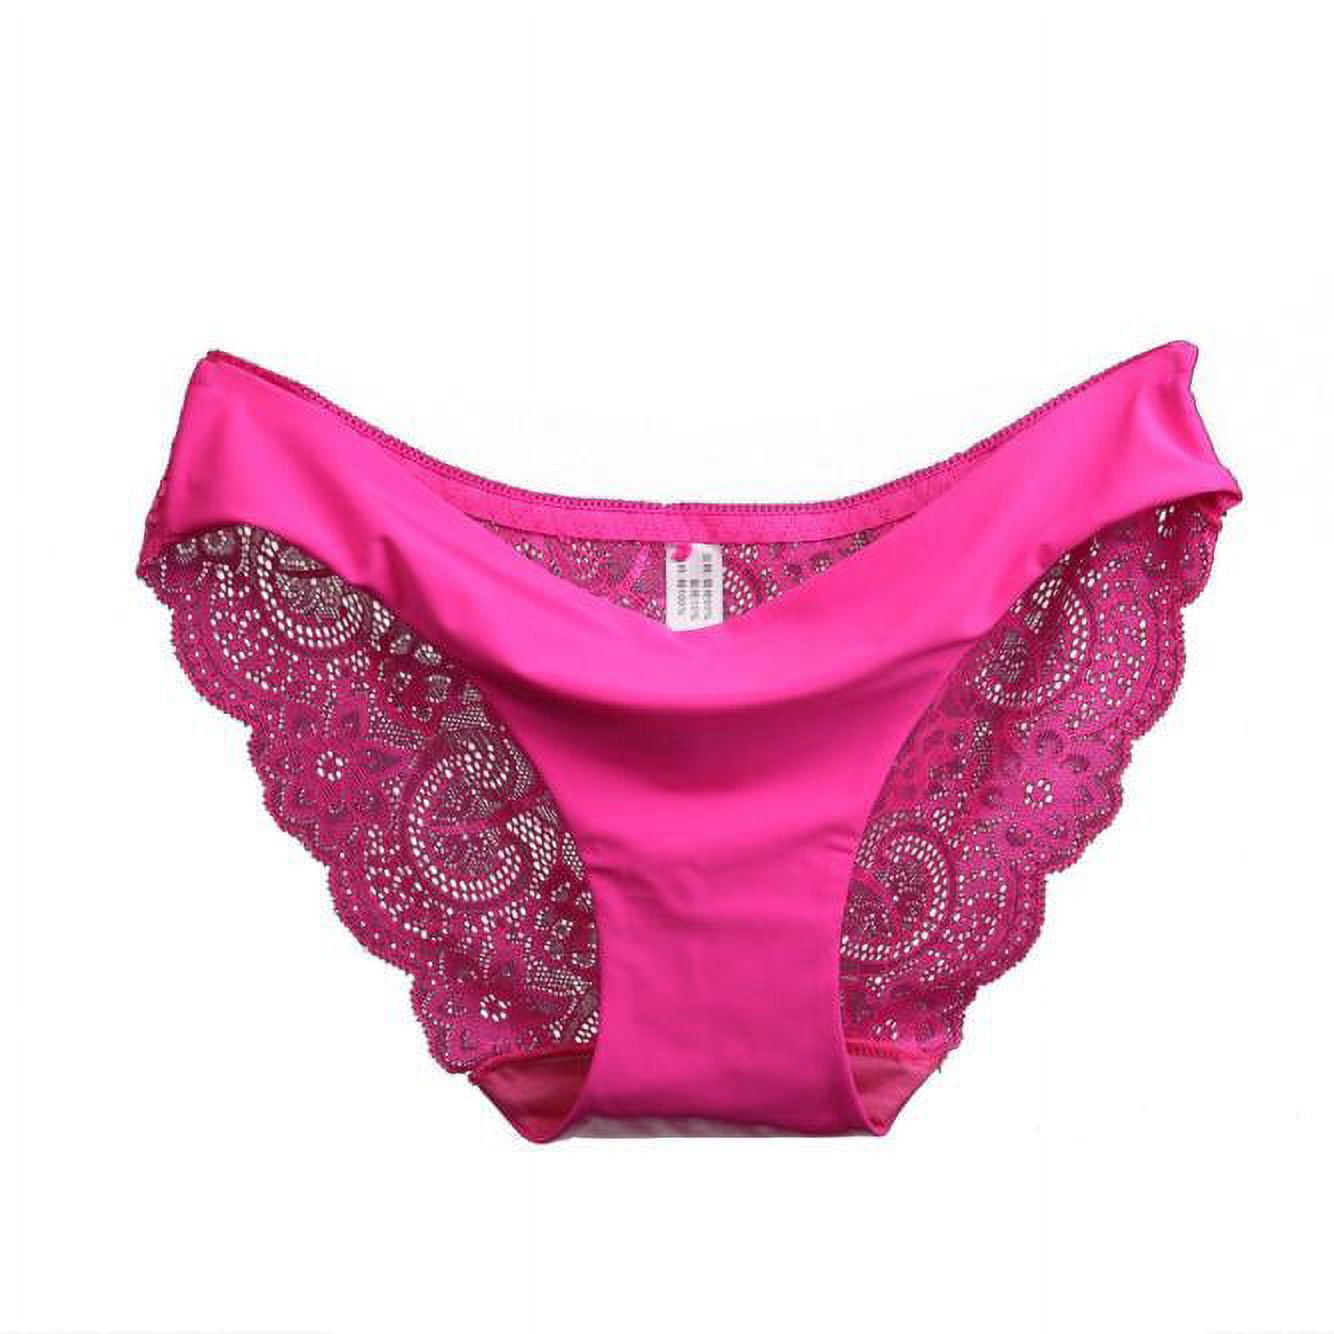 Wholesale Adult Baby Underwear Cotton, Lace, Seamless, Shaping